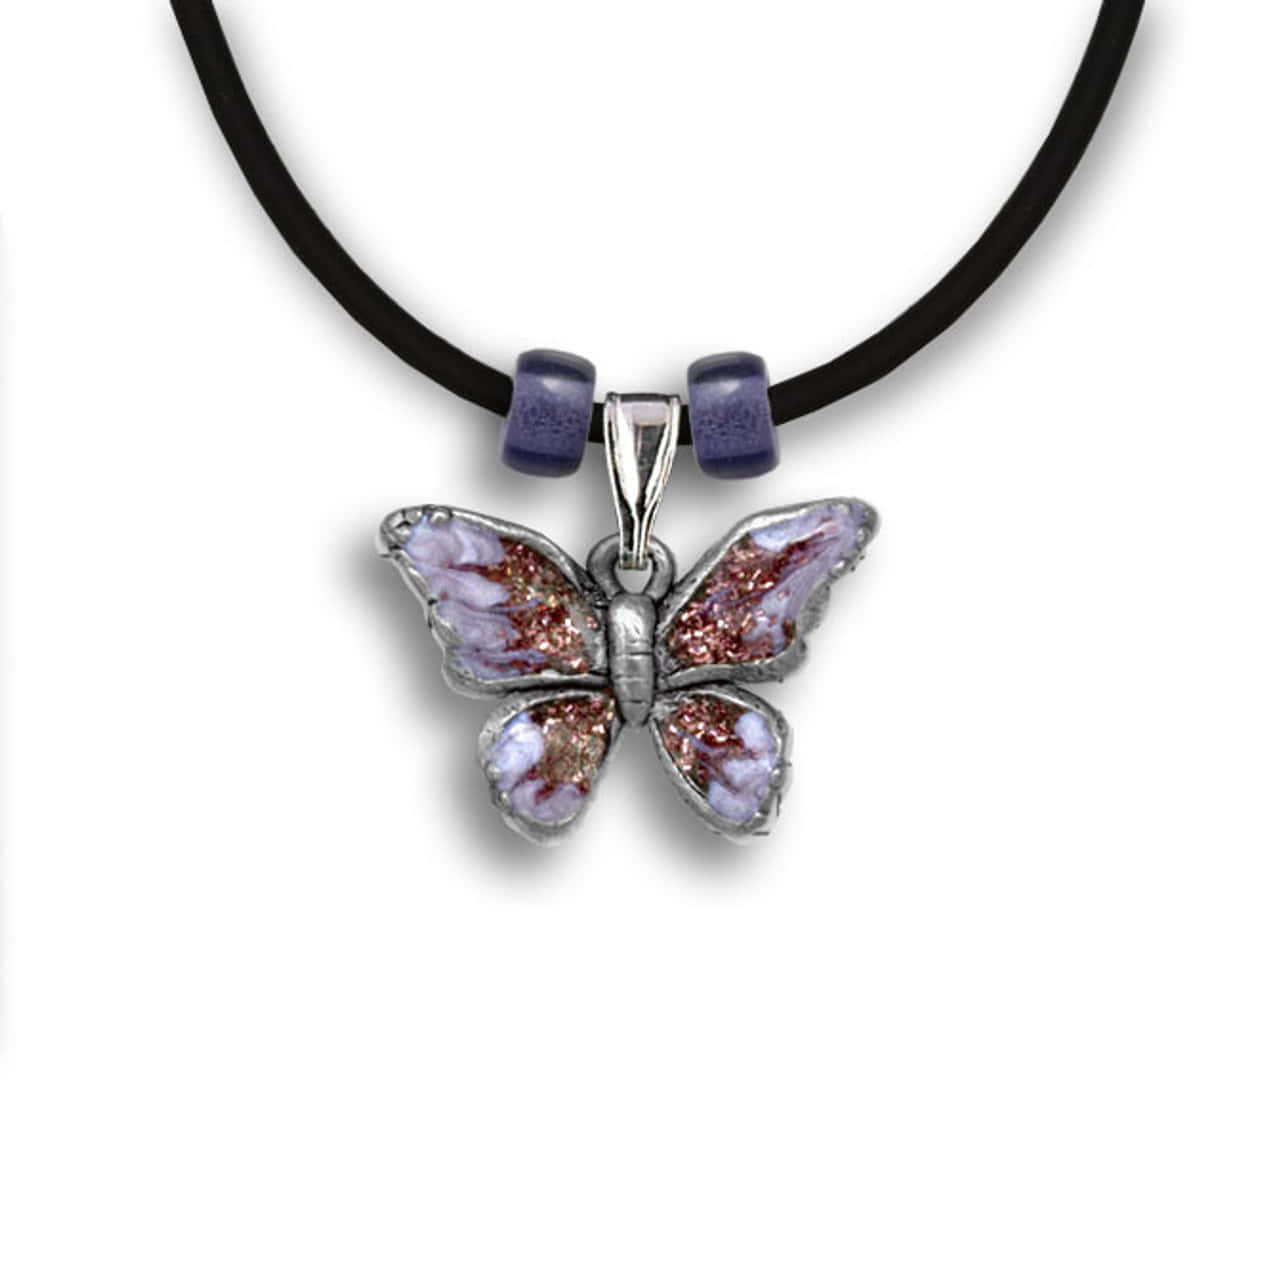 Adorn your look with our stunning Butterfly Jewelry Wallpaper